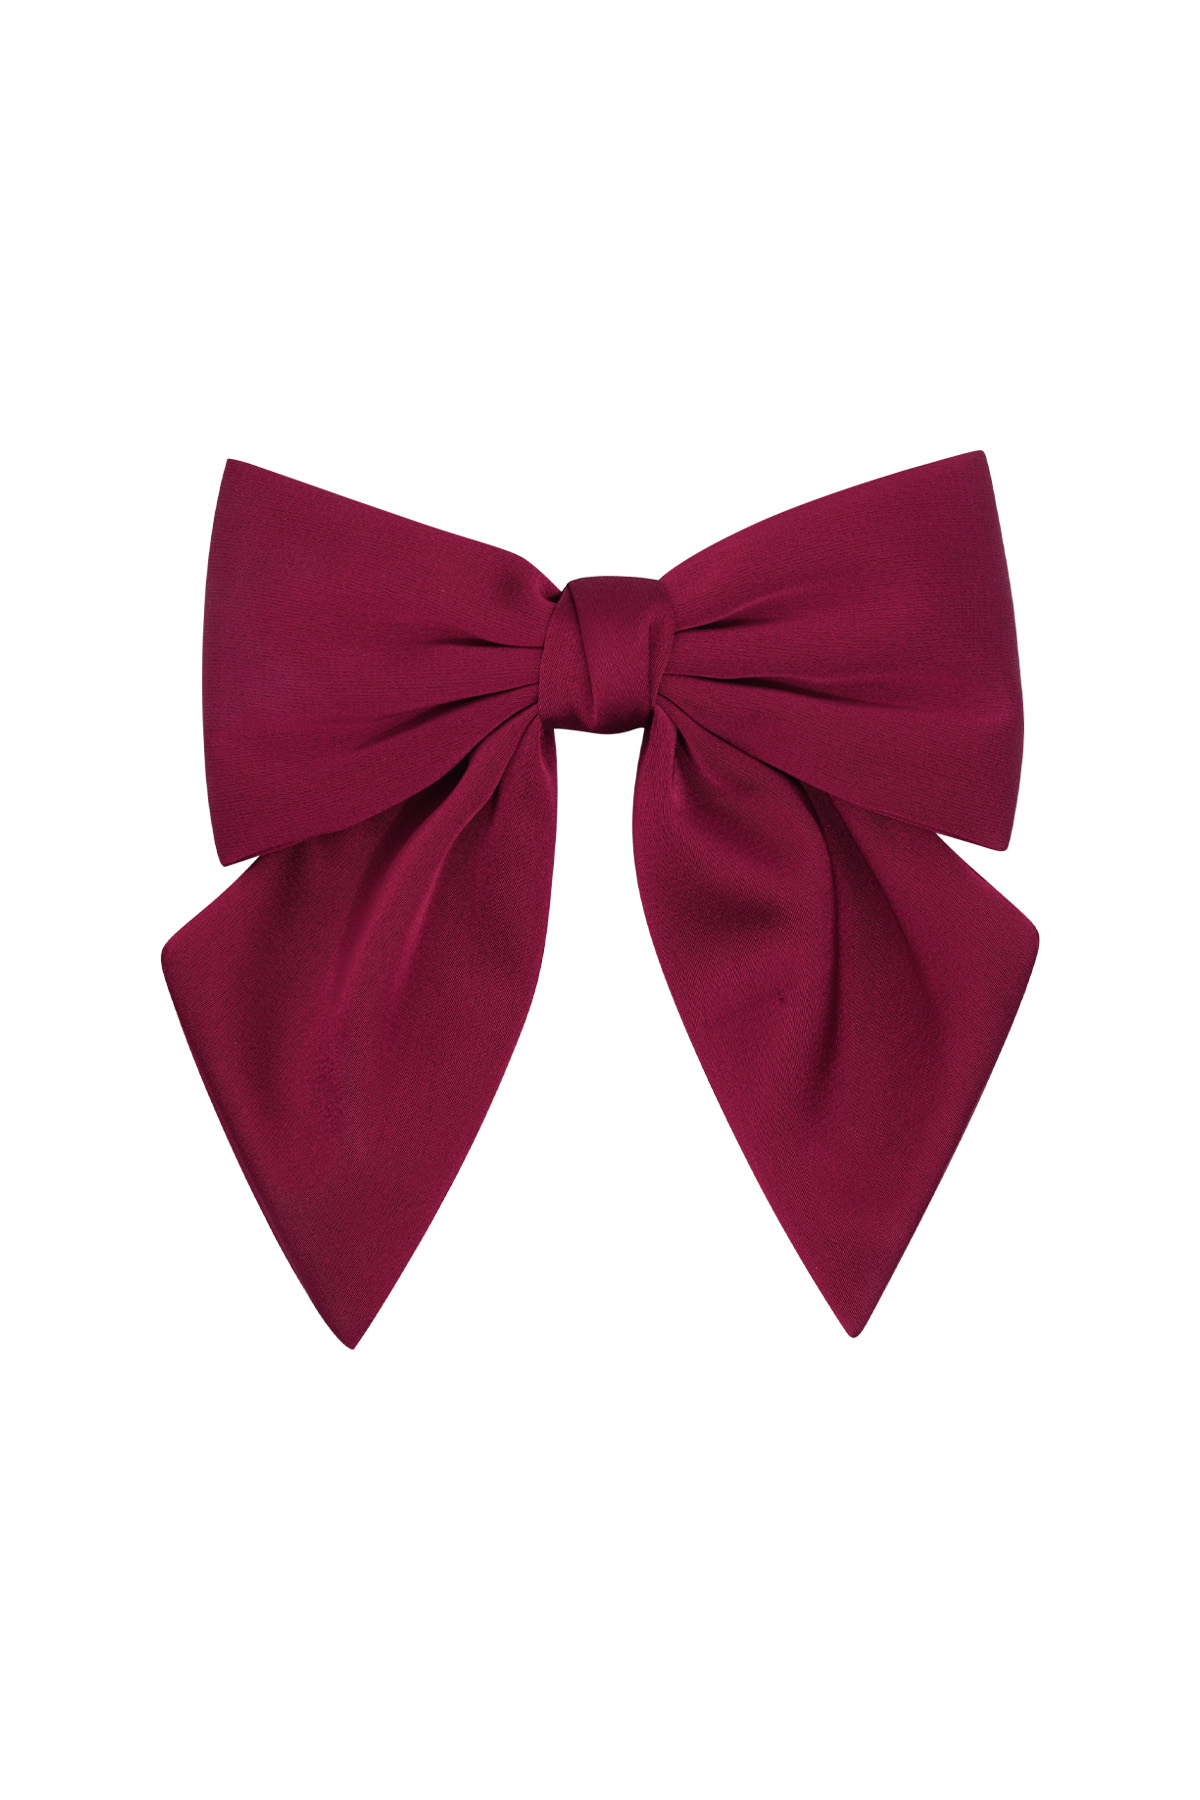 Simple hair bow - red